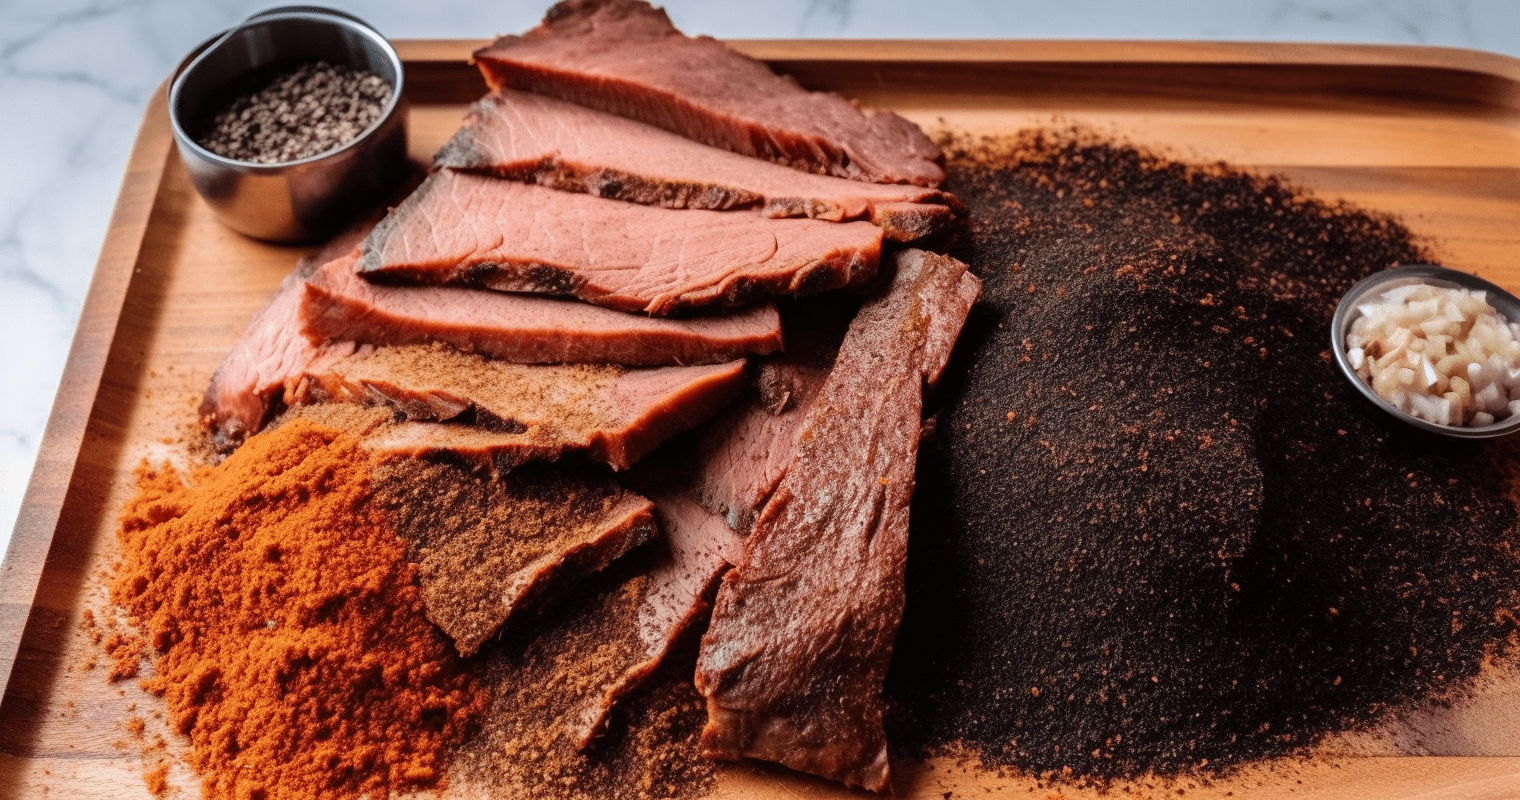 Smoked brisket ready to be served